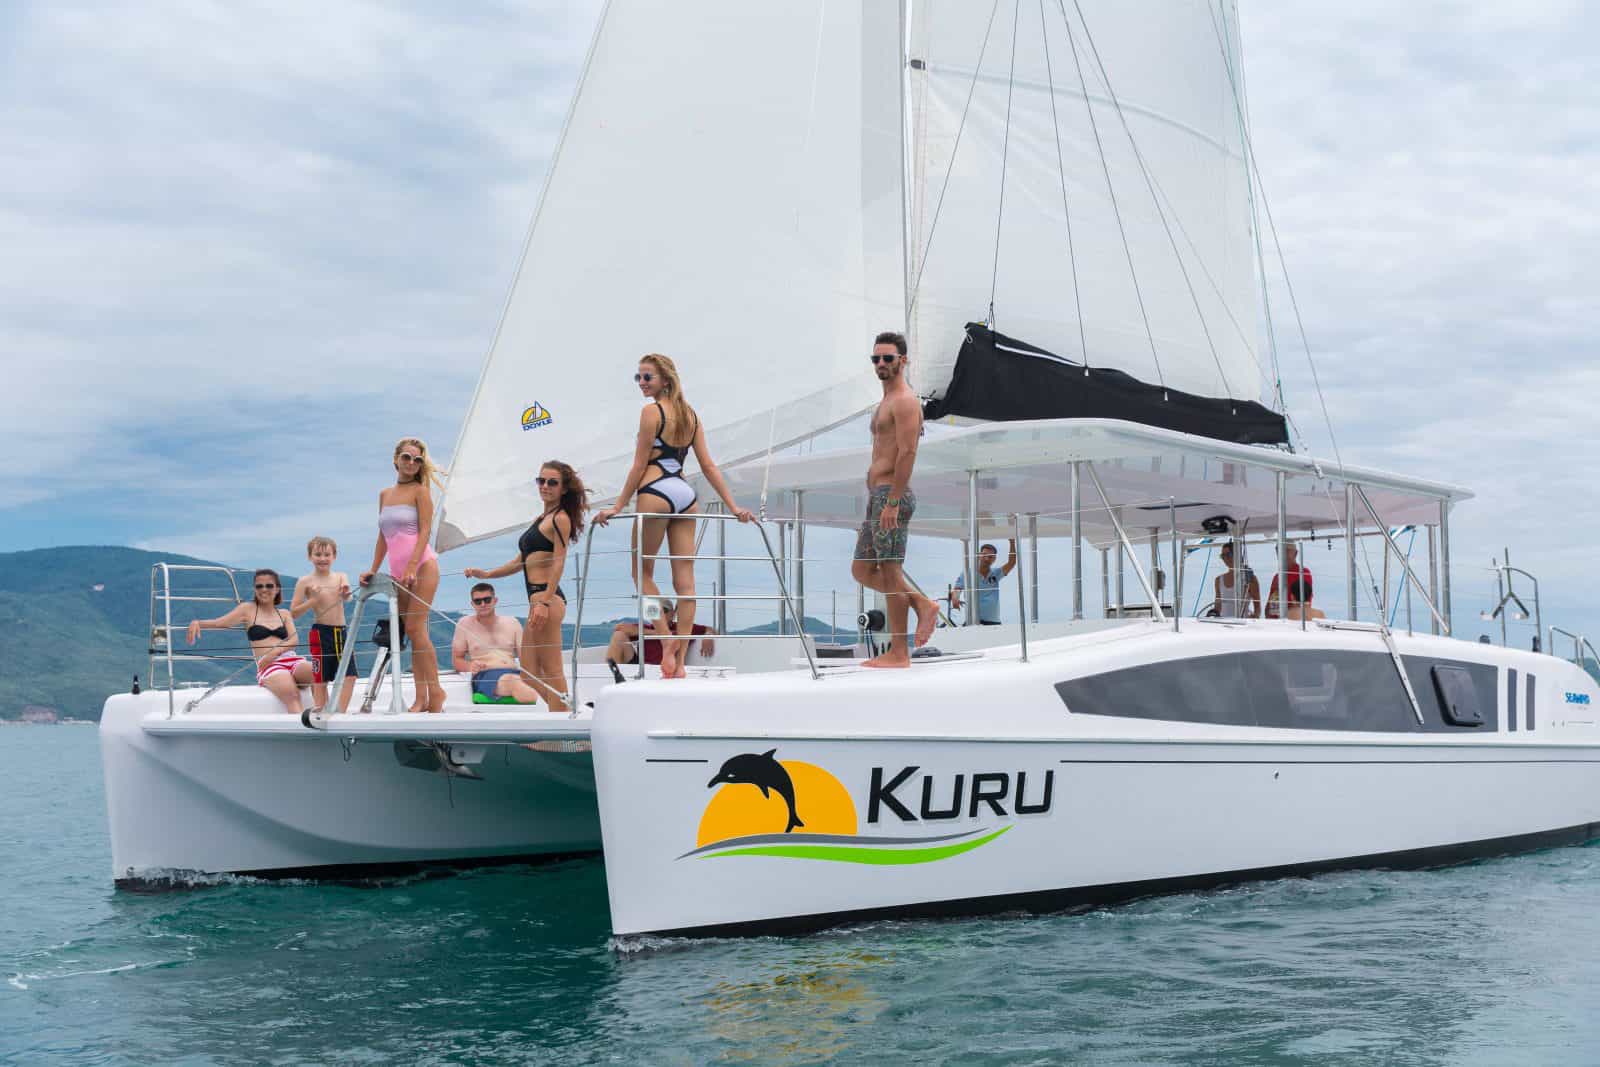 This photo shows Kuru, our signature vesselsailing in Vietnam prior to sailing to Darwin